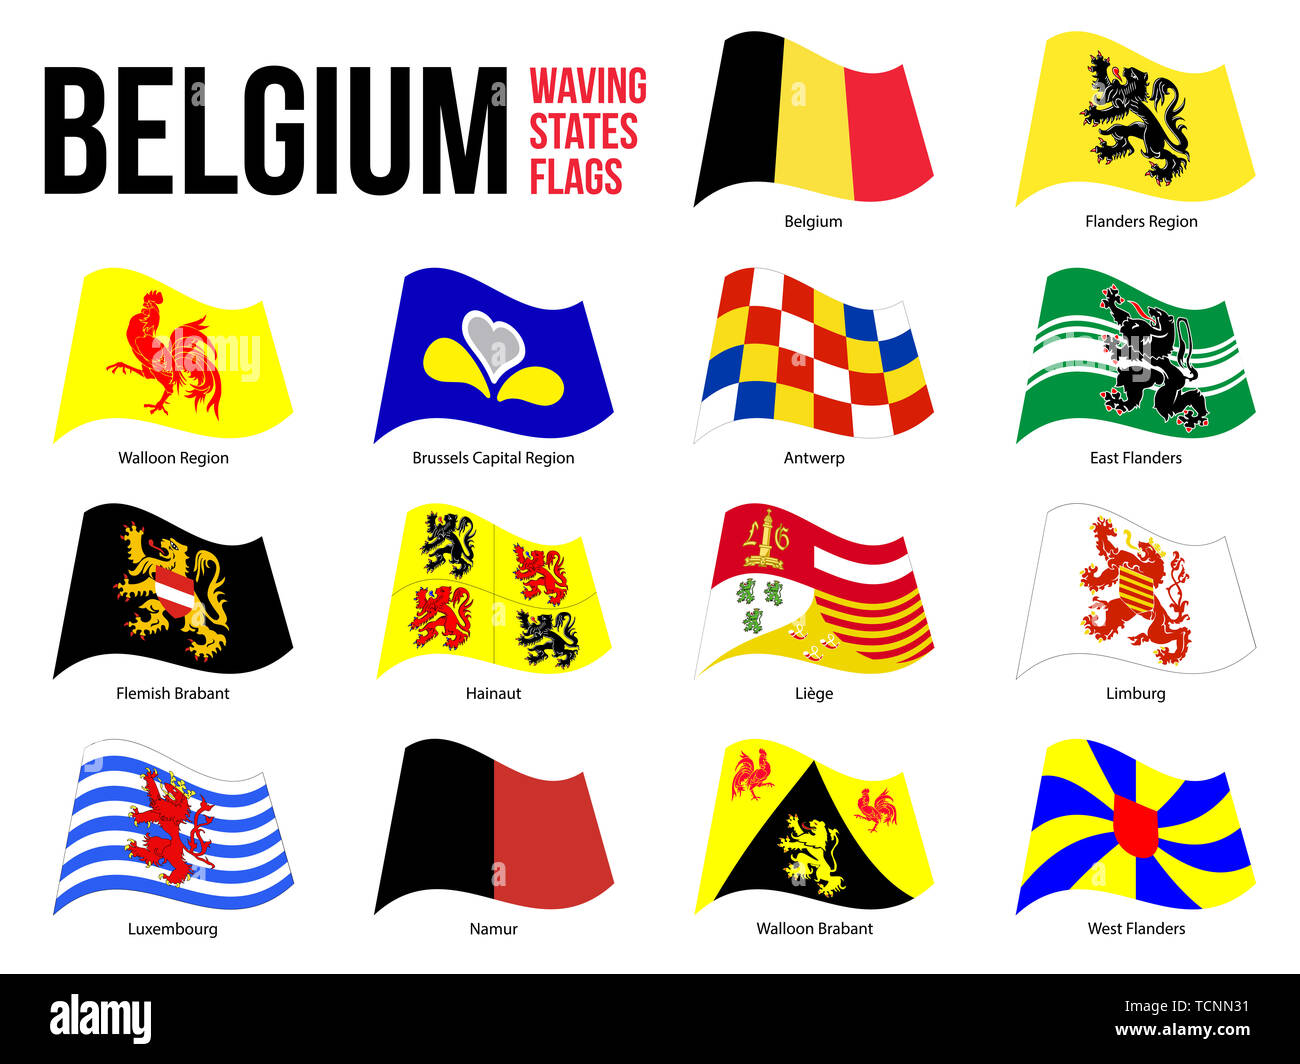 Belgium All Region & Provinces Flag Waving Vector Illustration on White Background. Flags of Belgium. Correct Size, Proportion and Colors. Stock Photo